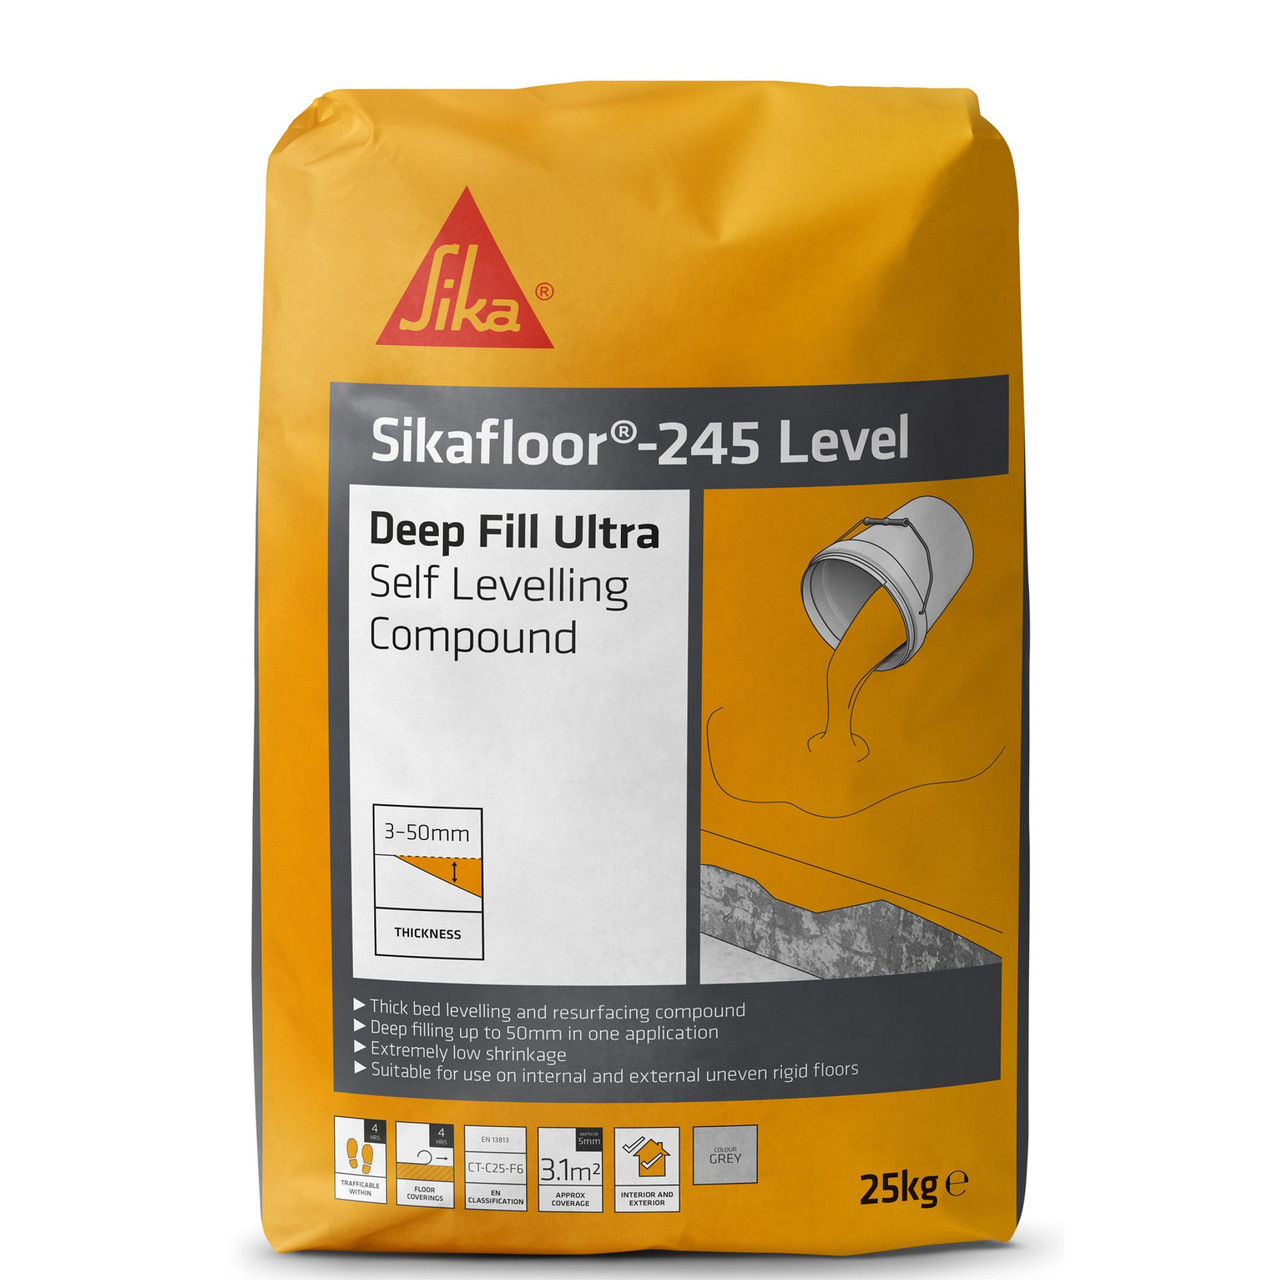 Photograph of Sikafloor 245 Level Deep Fill Ultra Self Levelling Compound 25kg